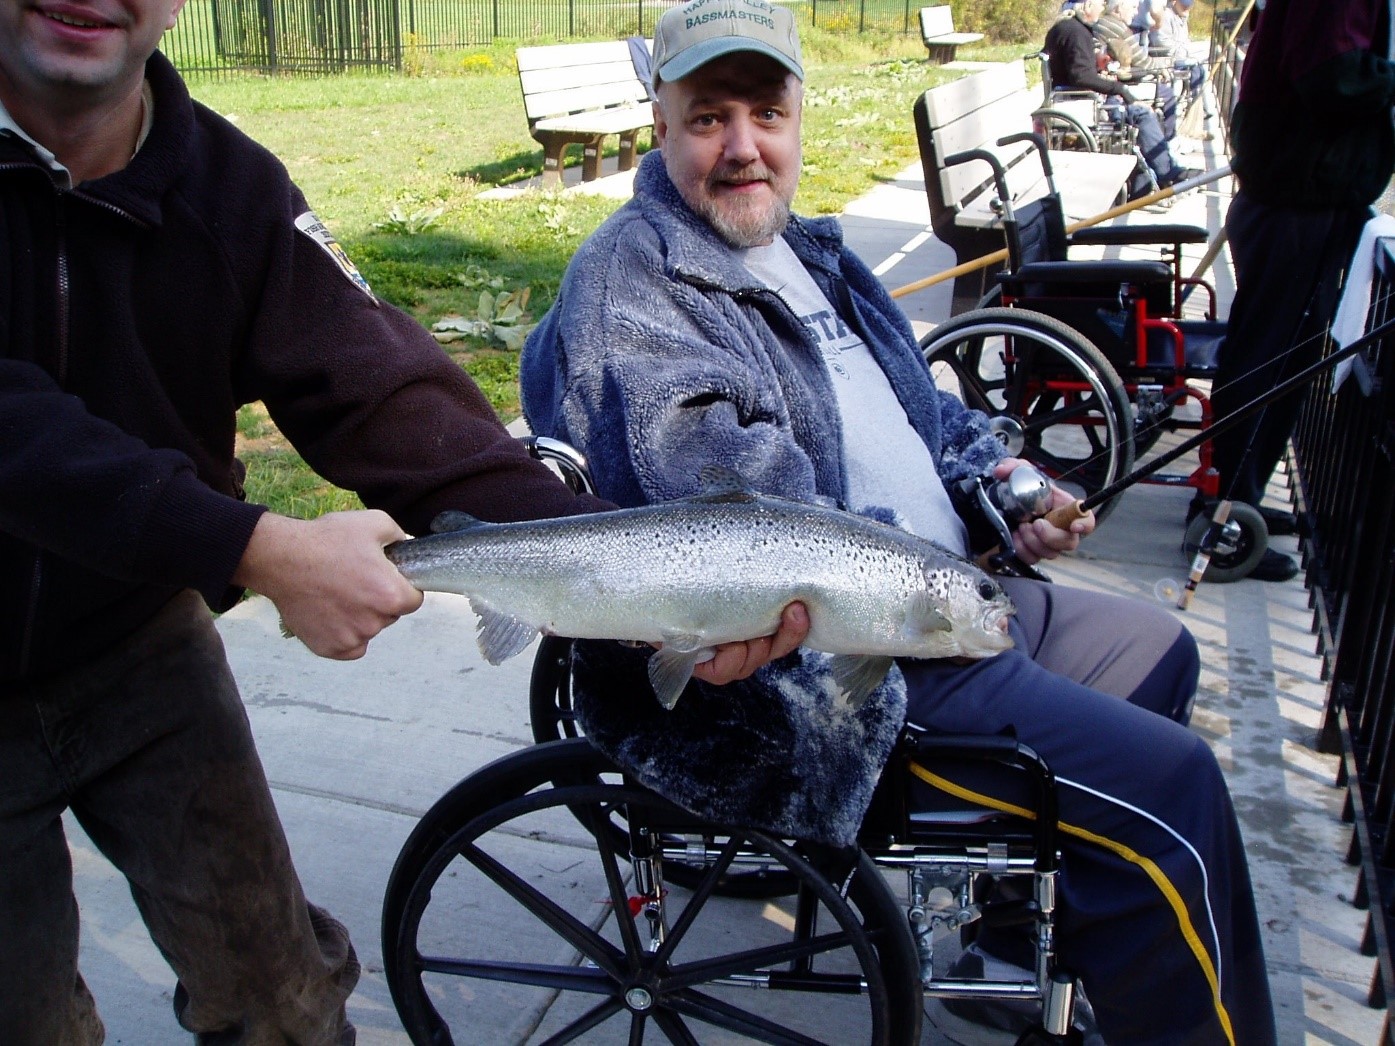 Fishing Day participant holds a silver, glimmering fish in front of another participant